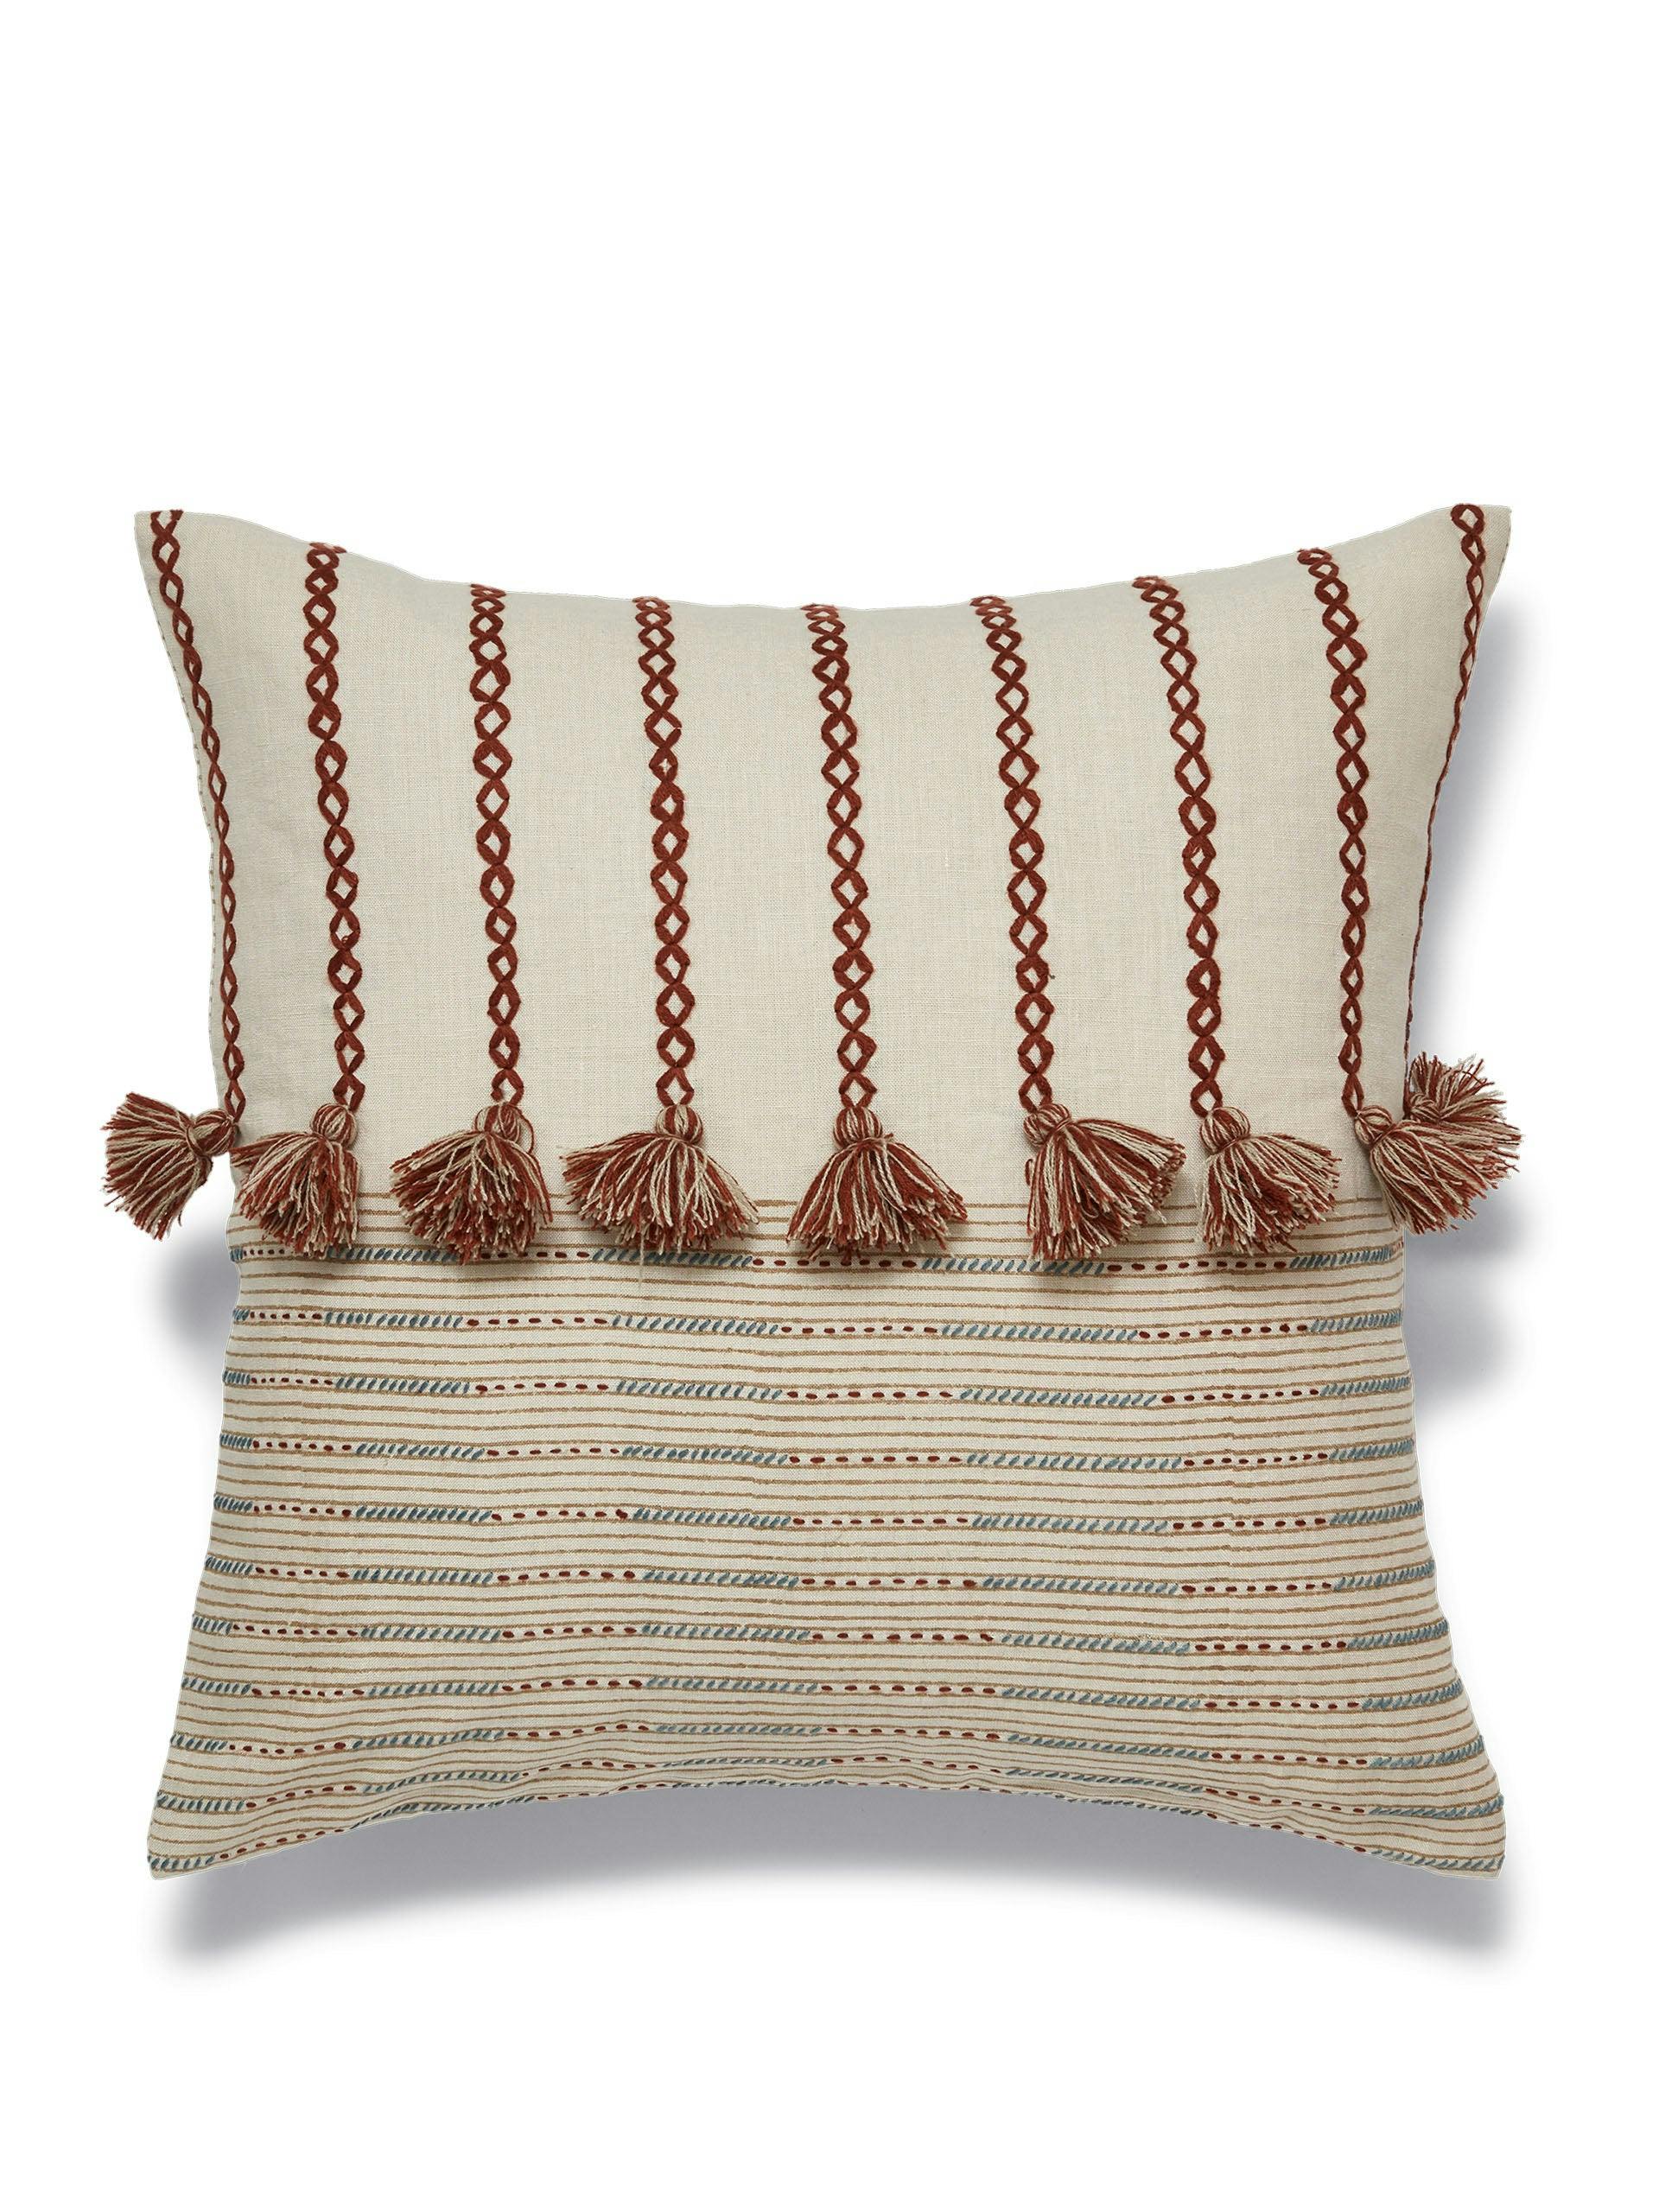 Morse striped and tasselled cushion cover